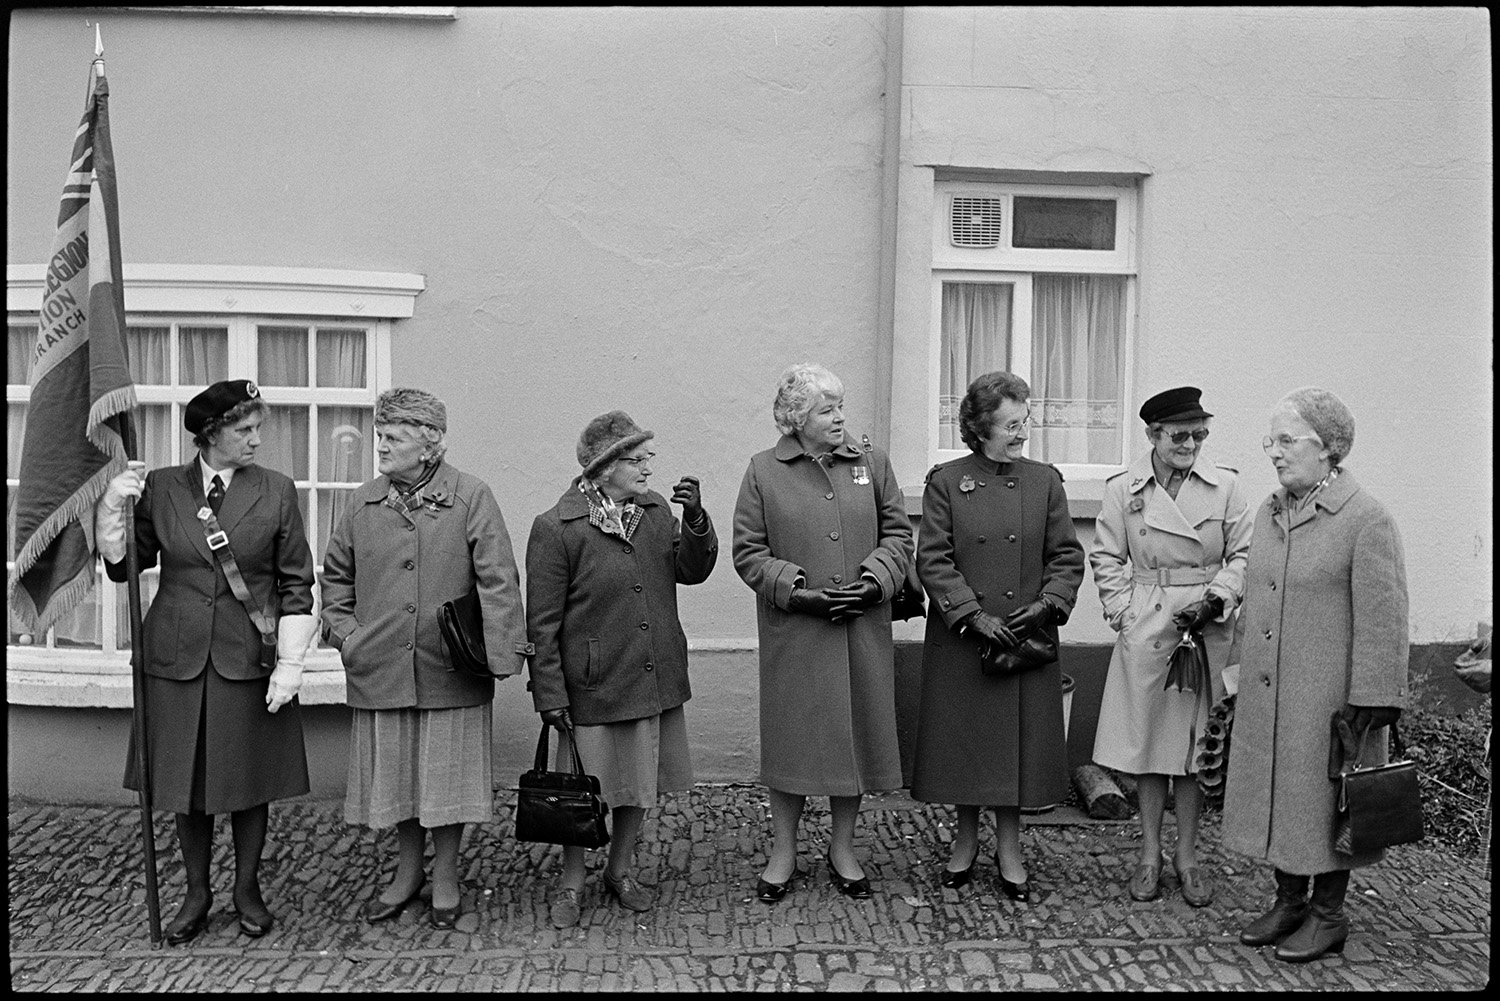 Men and women assembling for Remembrance Sunday Parade, some with bowler hats and medals.
[Seven woman waiting for the Remembrance Sunday Parade at Chulmleigh. They are standing on a cobbled pavement in front of a house. One is in uniform and holding a Royal British Legion flag, another is wearing medals and the other women are wearing poppies.]